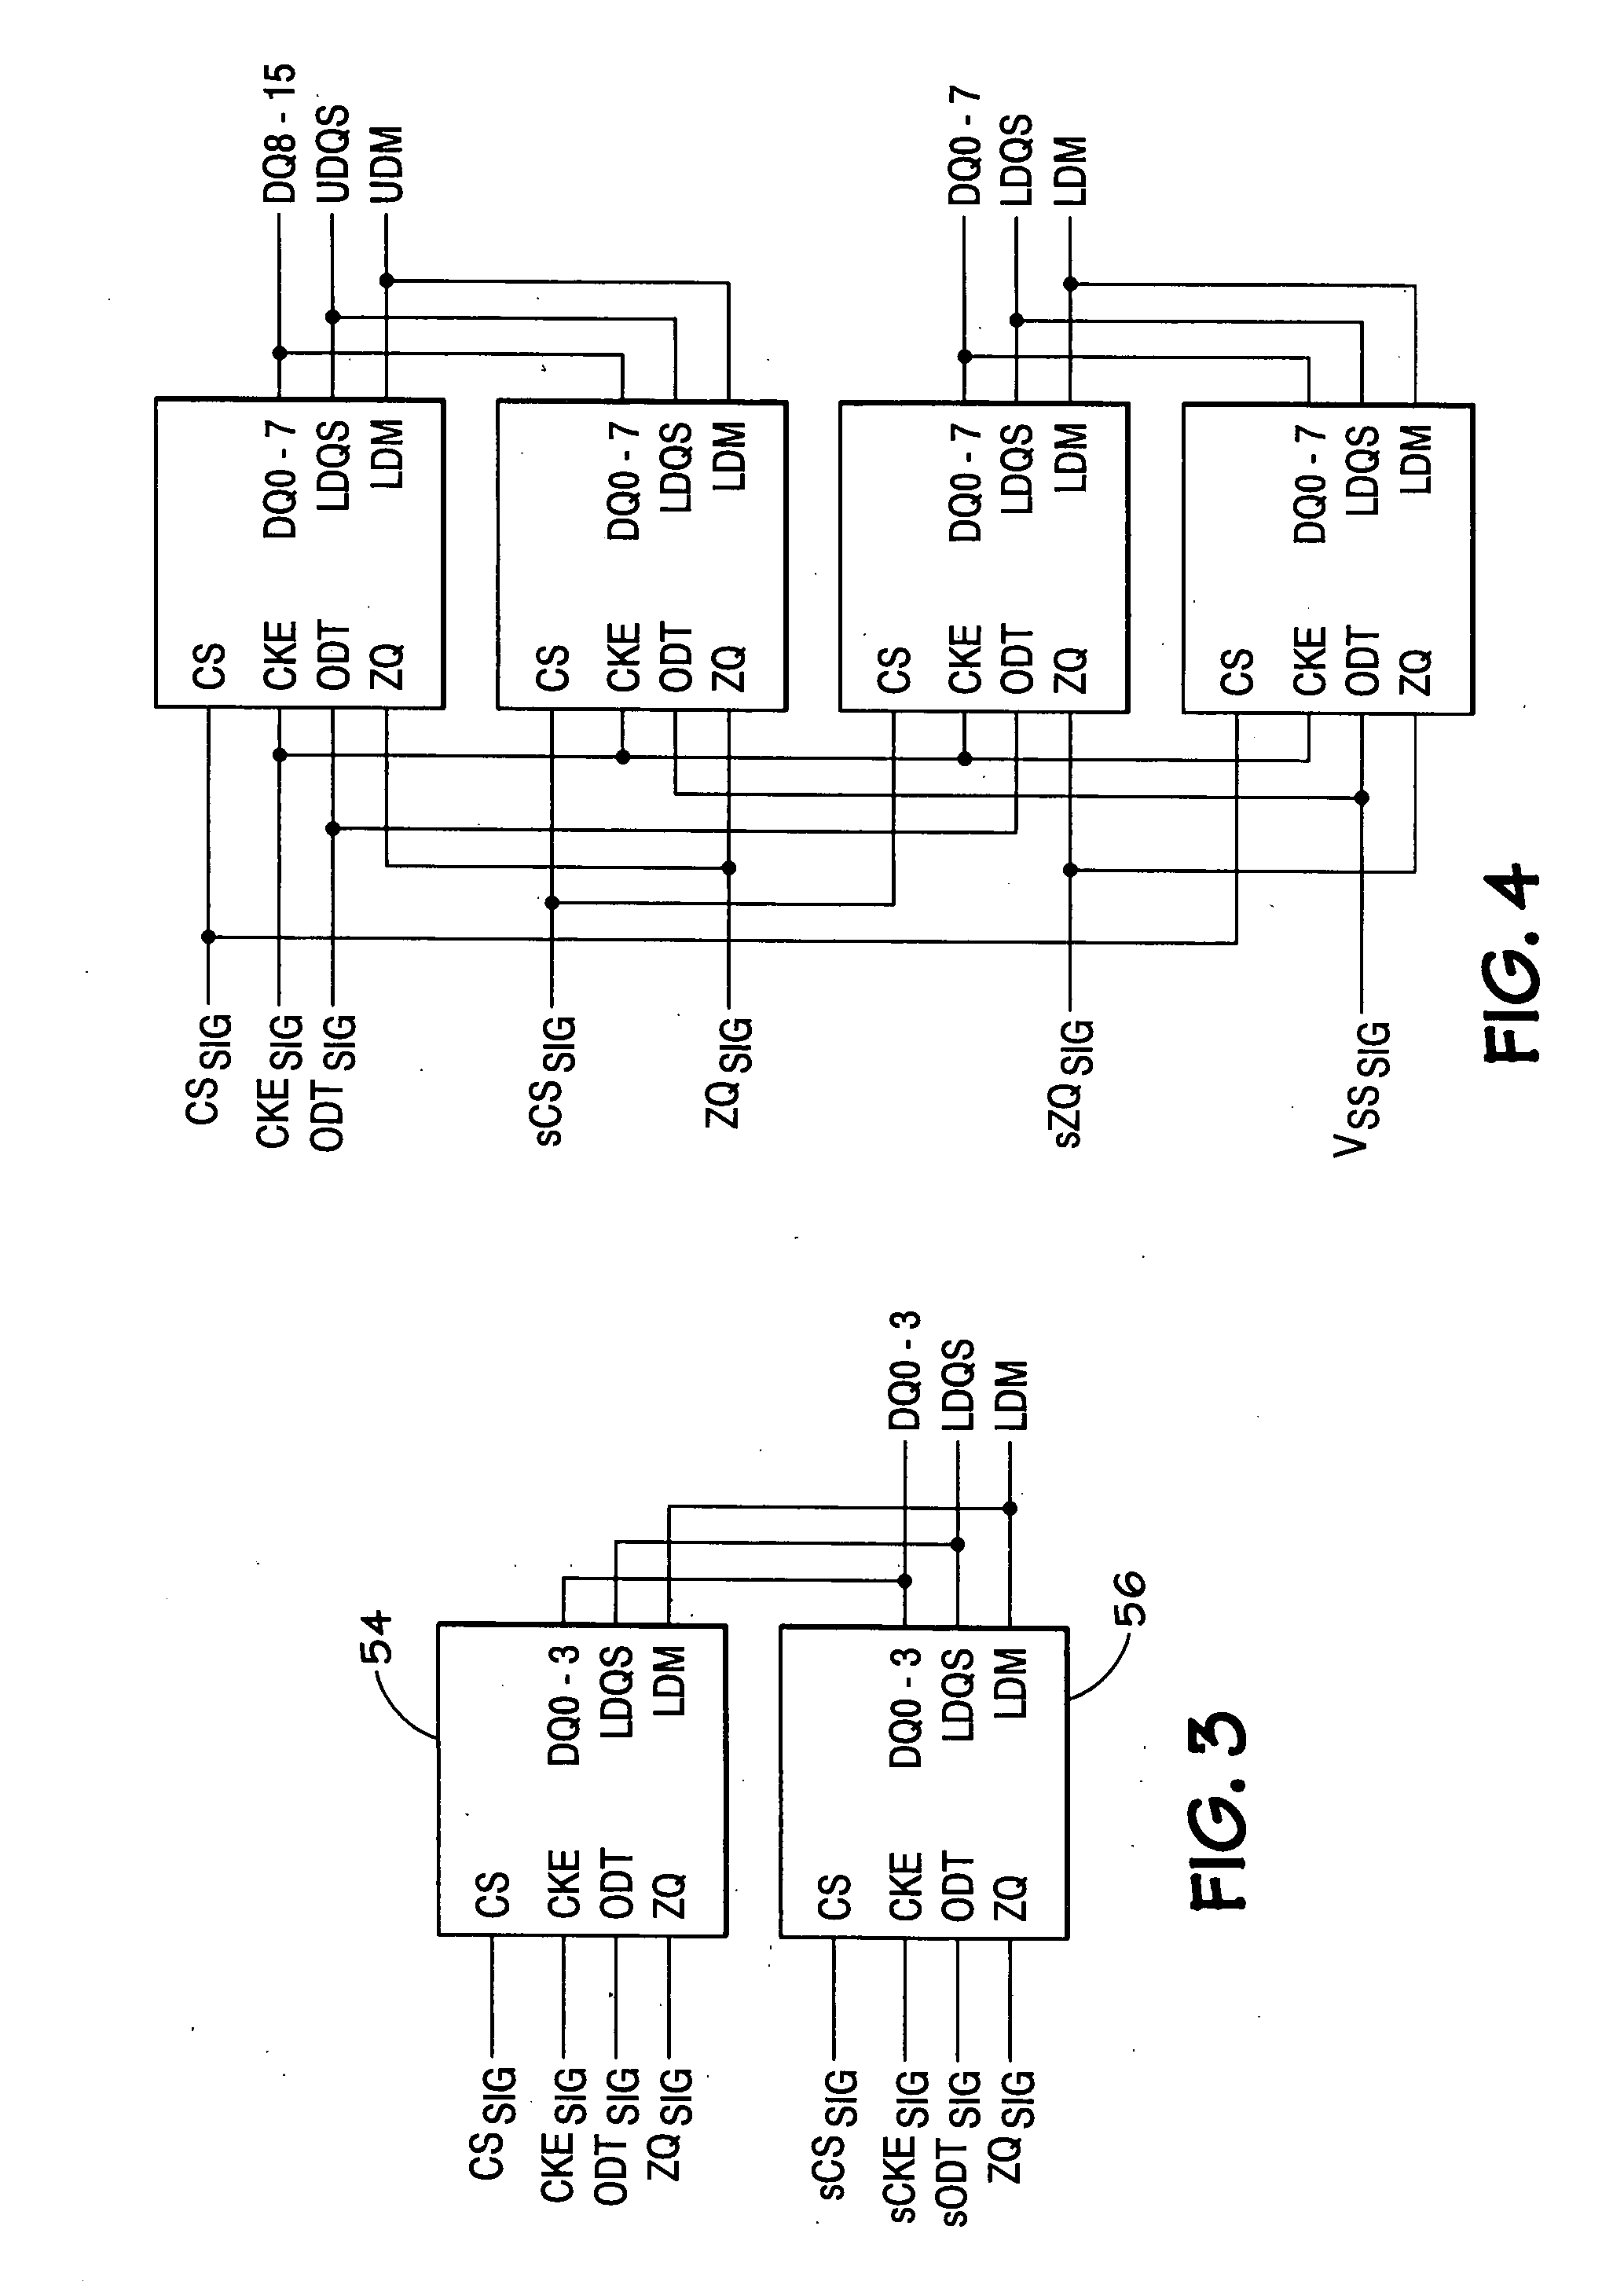 Configurable inputs and outputs for memory stacking system and method